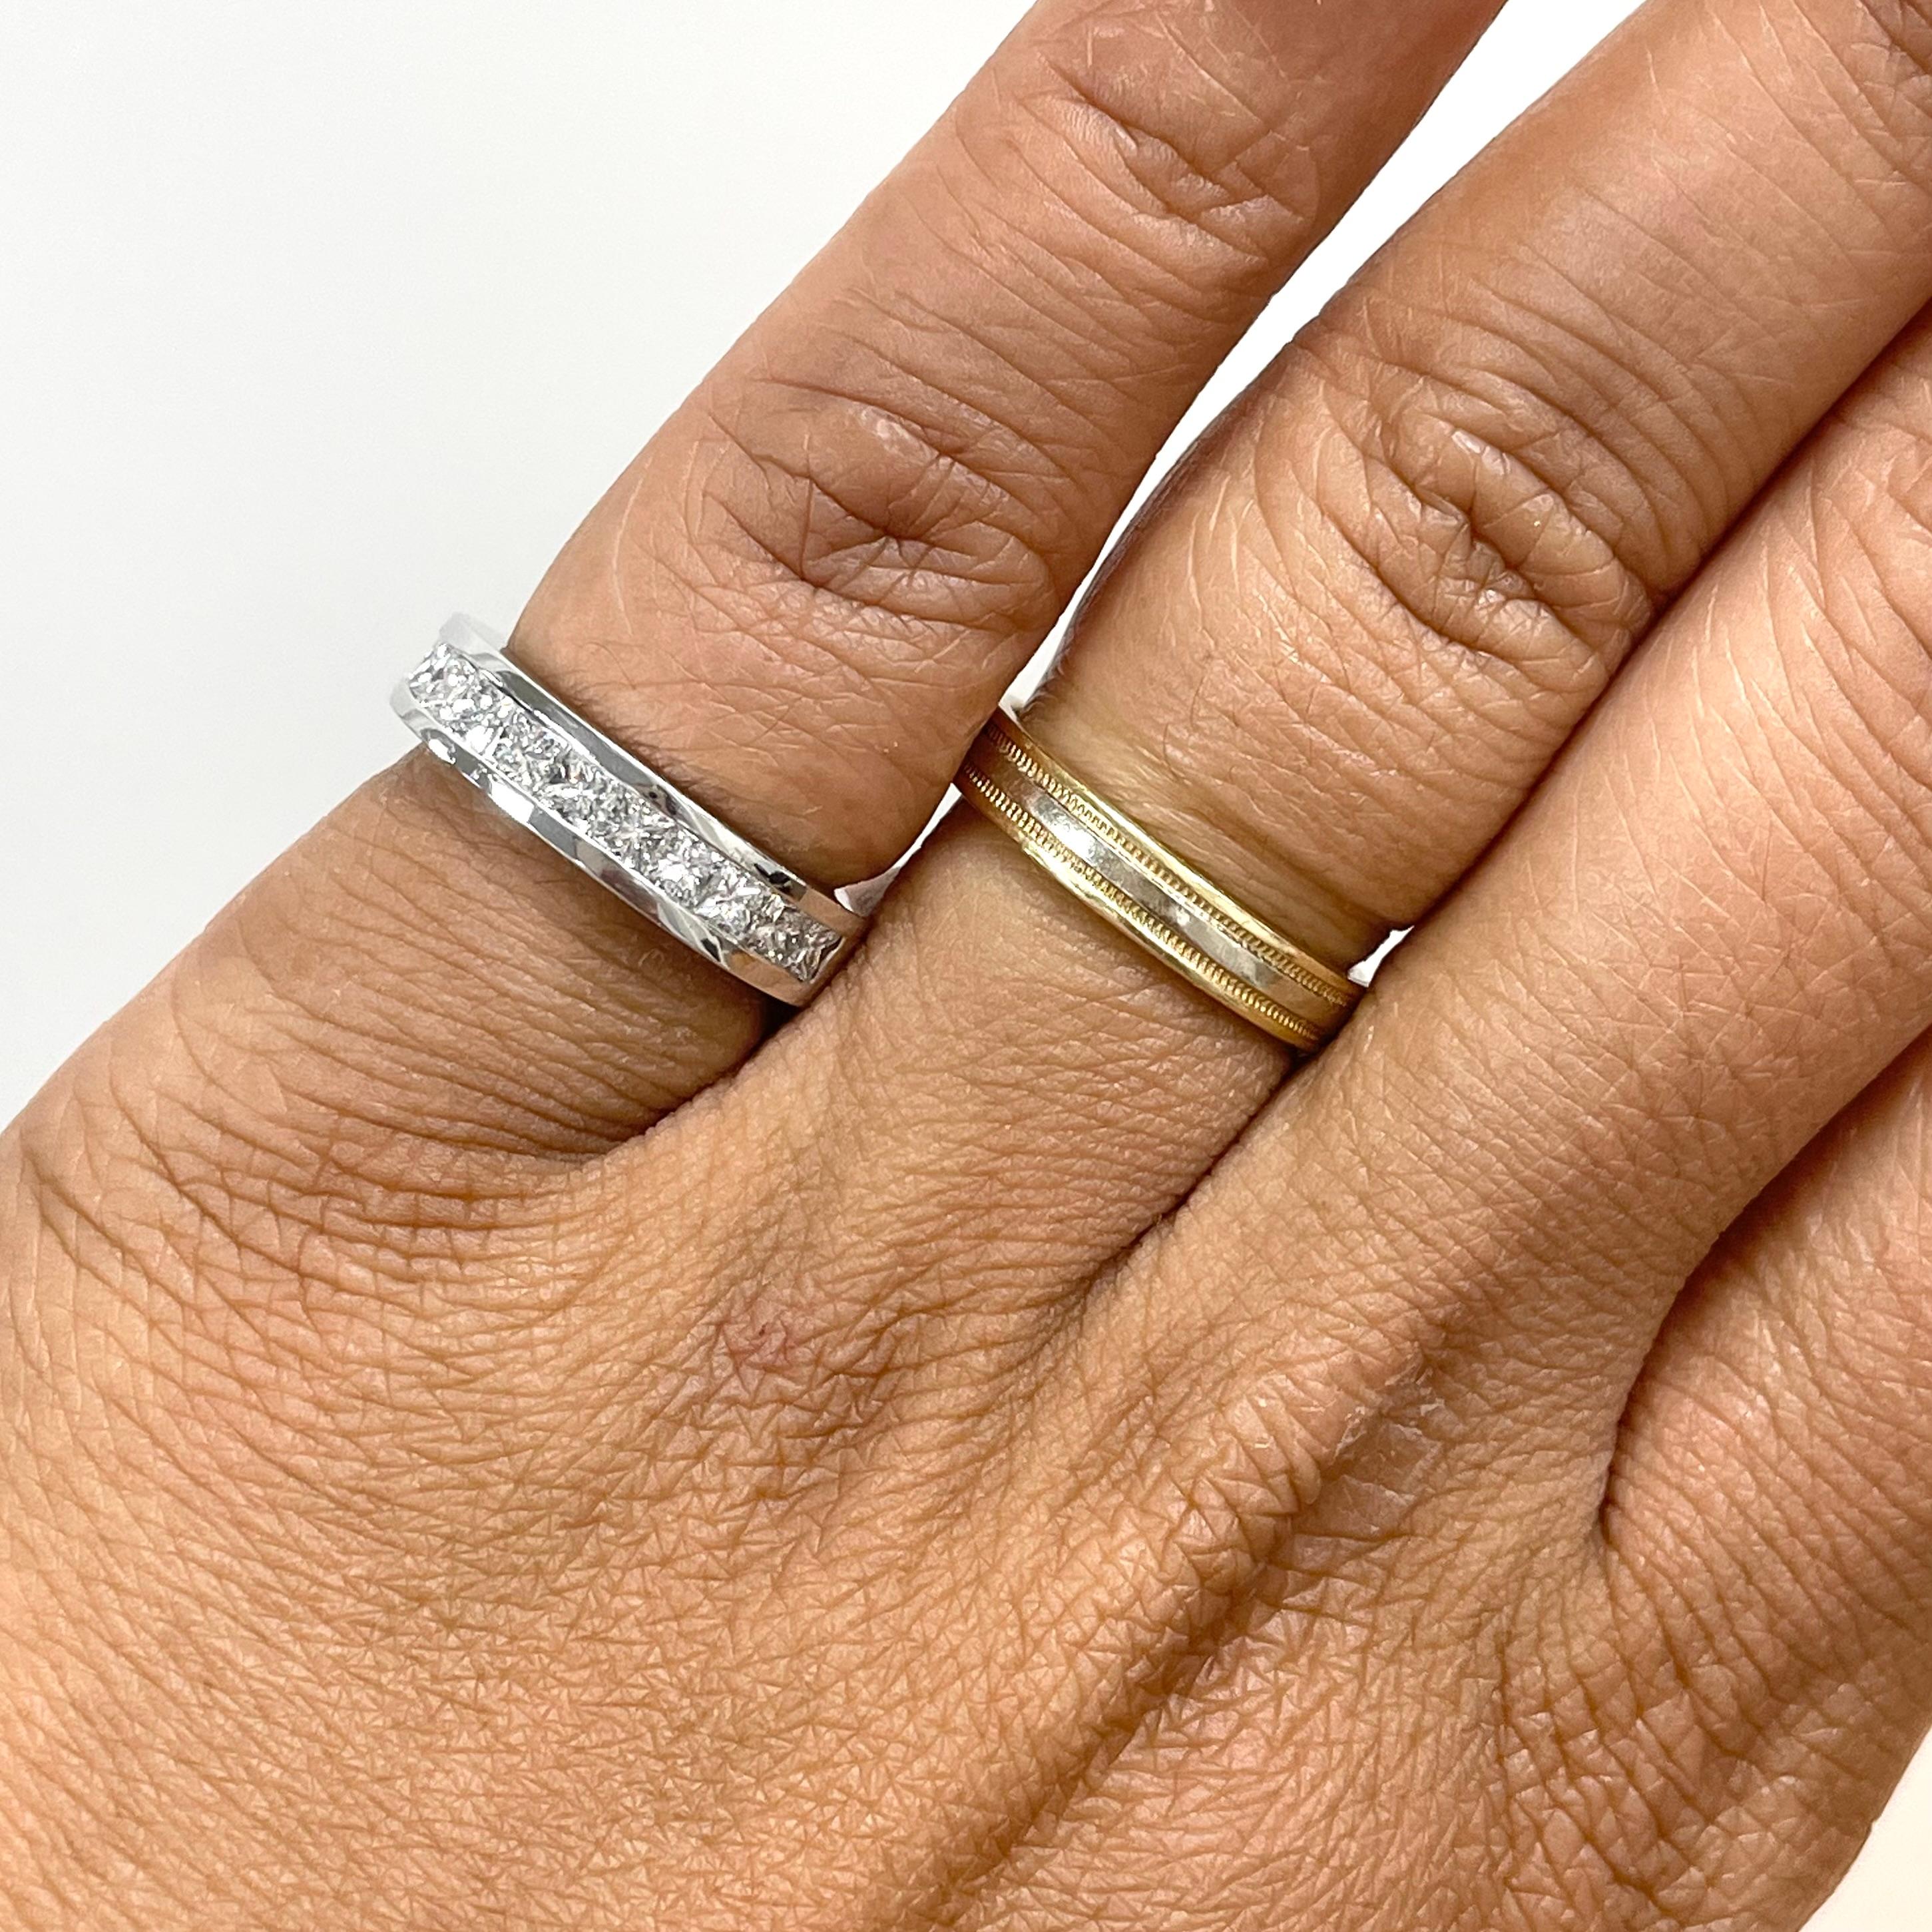 This half way Channel Set Diamond Band offers both the bling, and a charisma that is slightly subdued. A classic style, it is comfortable and evergreen. 

Total Diamond Weight: 1.25 ct
No. of Diamonds: 11
Diamond Color: F - G
Diamond Clarity: VVS